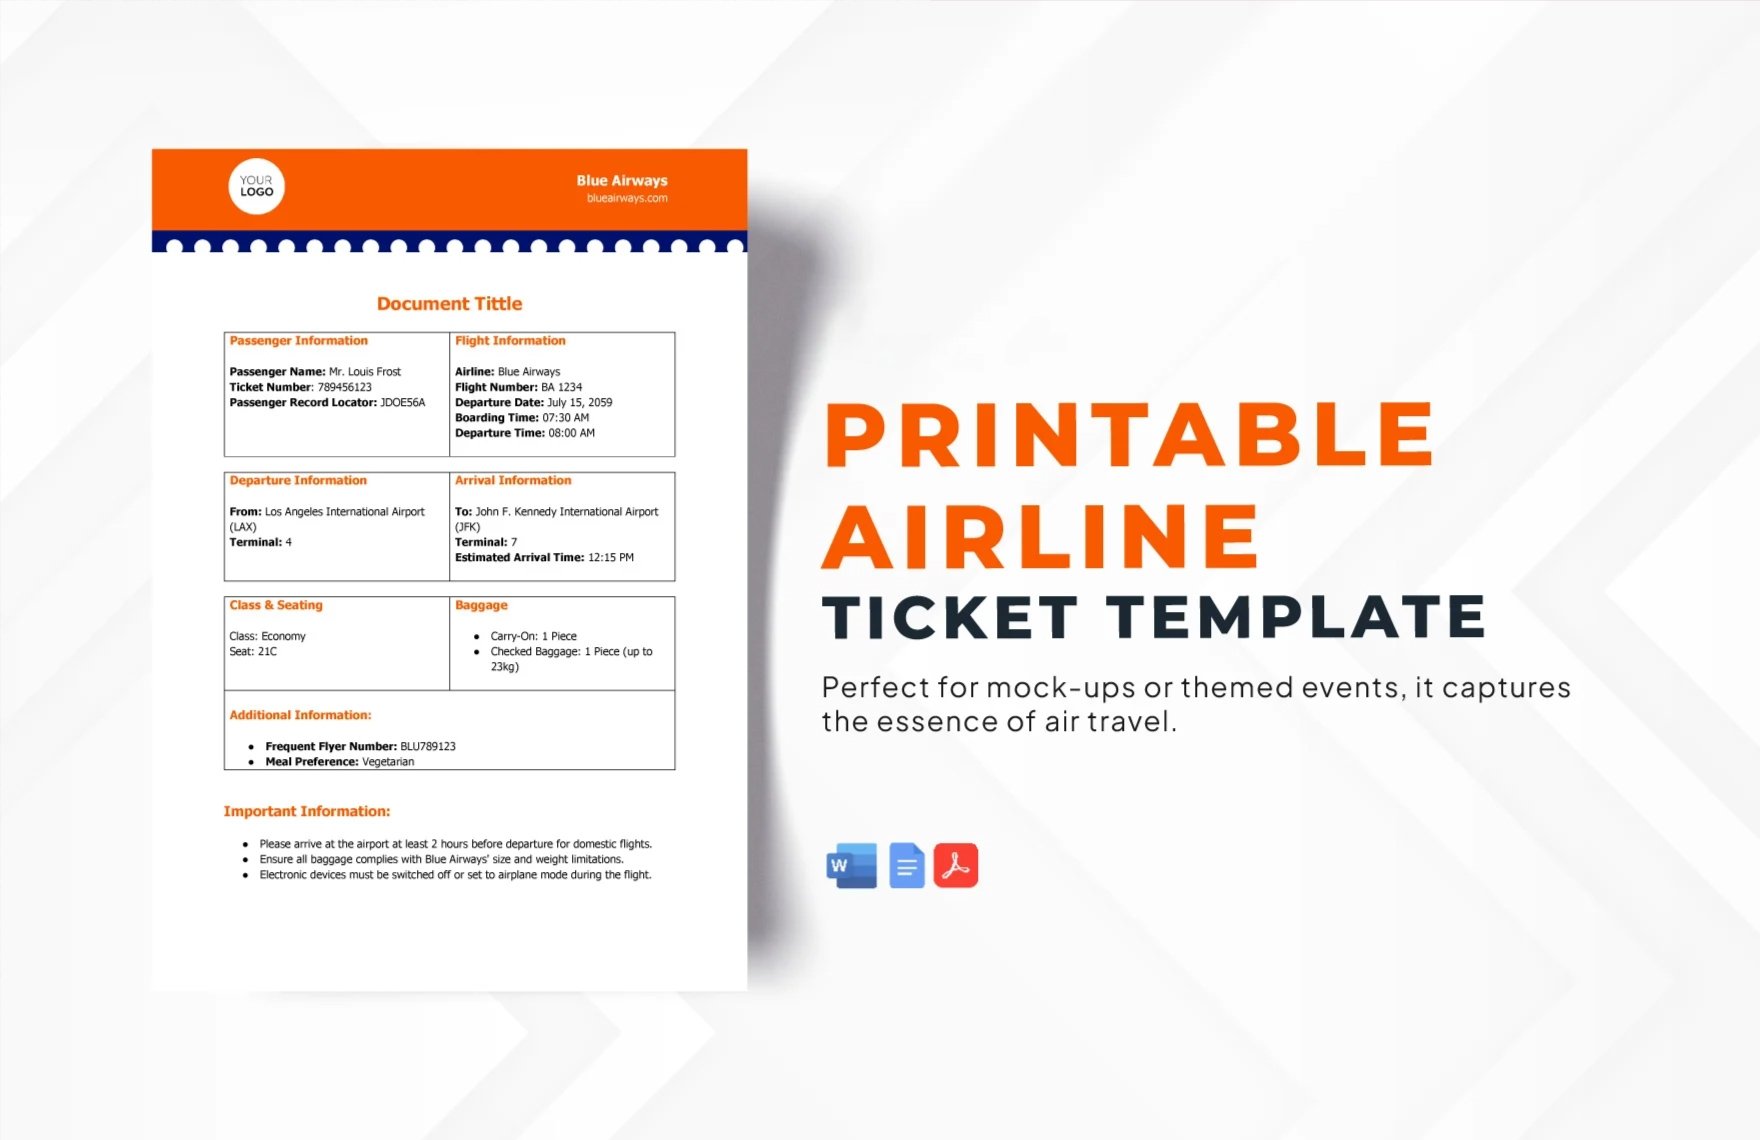 Free Printable Airline Ticket Template in Word, Google Docs, PDF